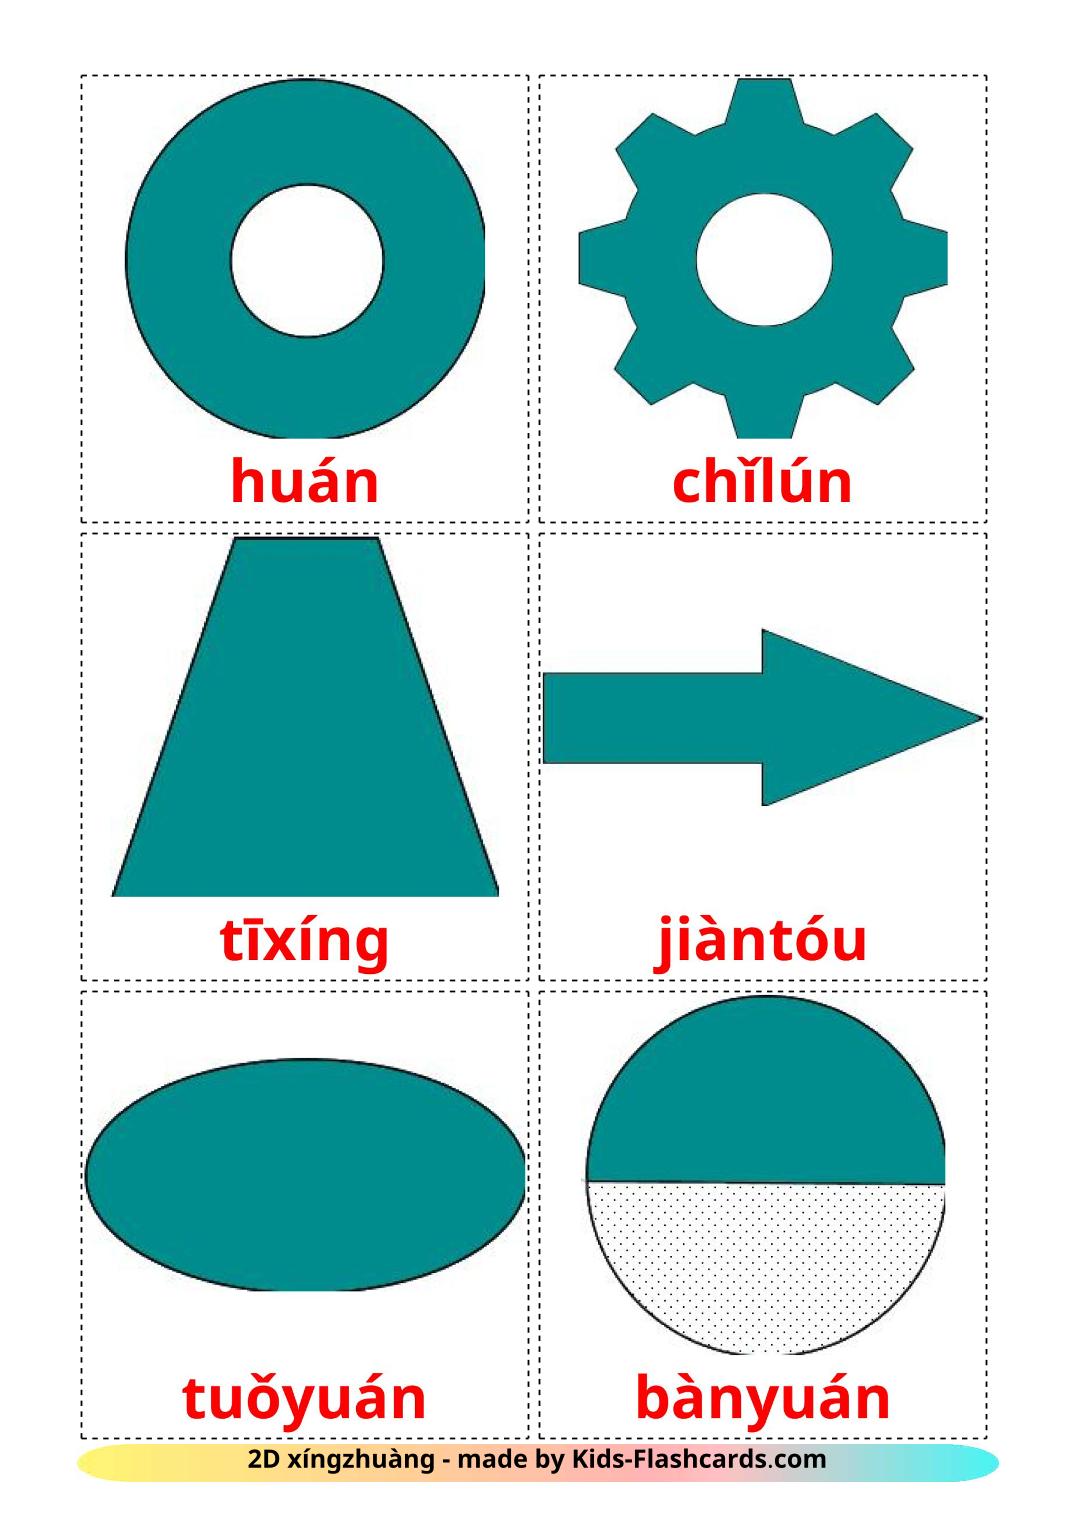 2D Shapes - 35 Free Printable pinyin Flashcards 